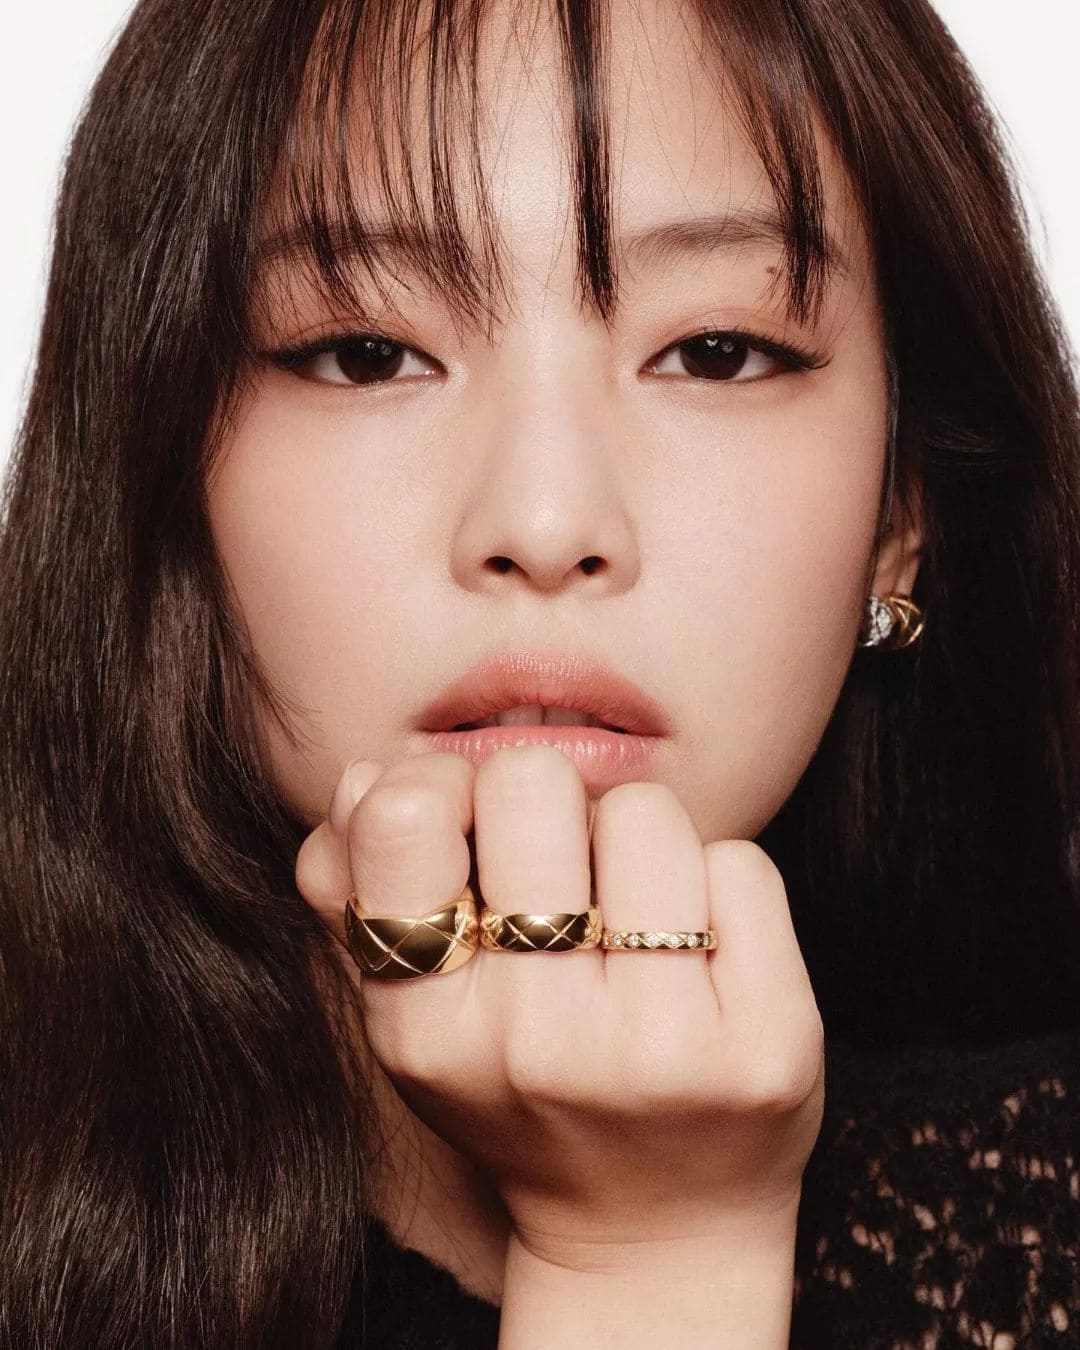 new chanel coco crush campaign, starring Jennie, the star of Blackpink